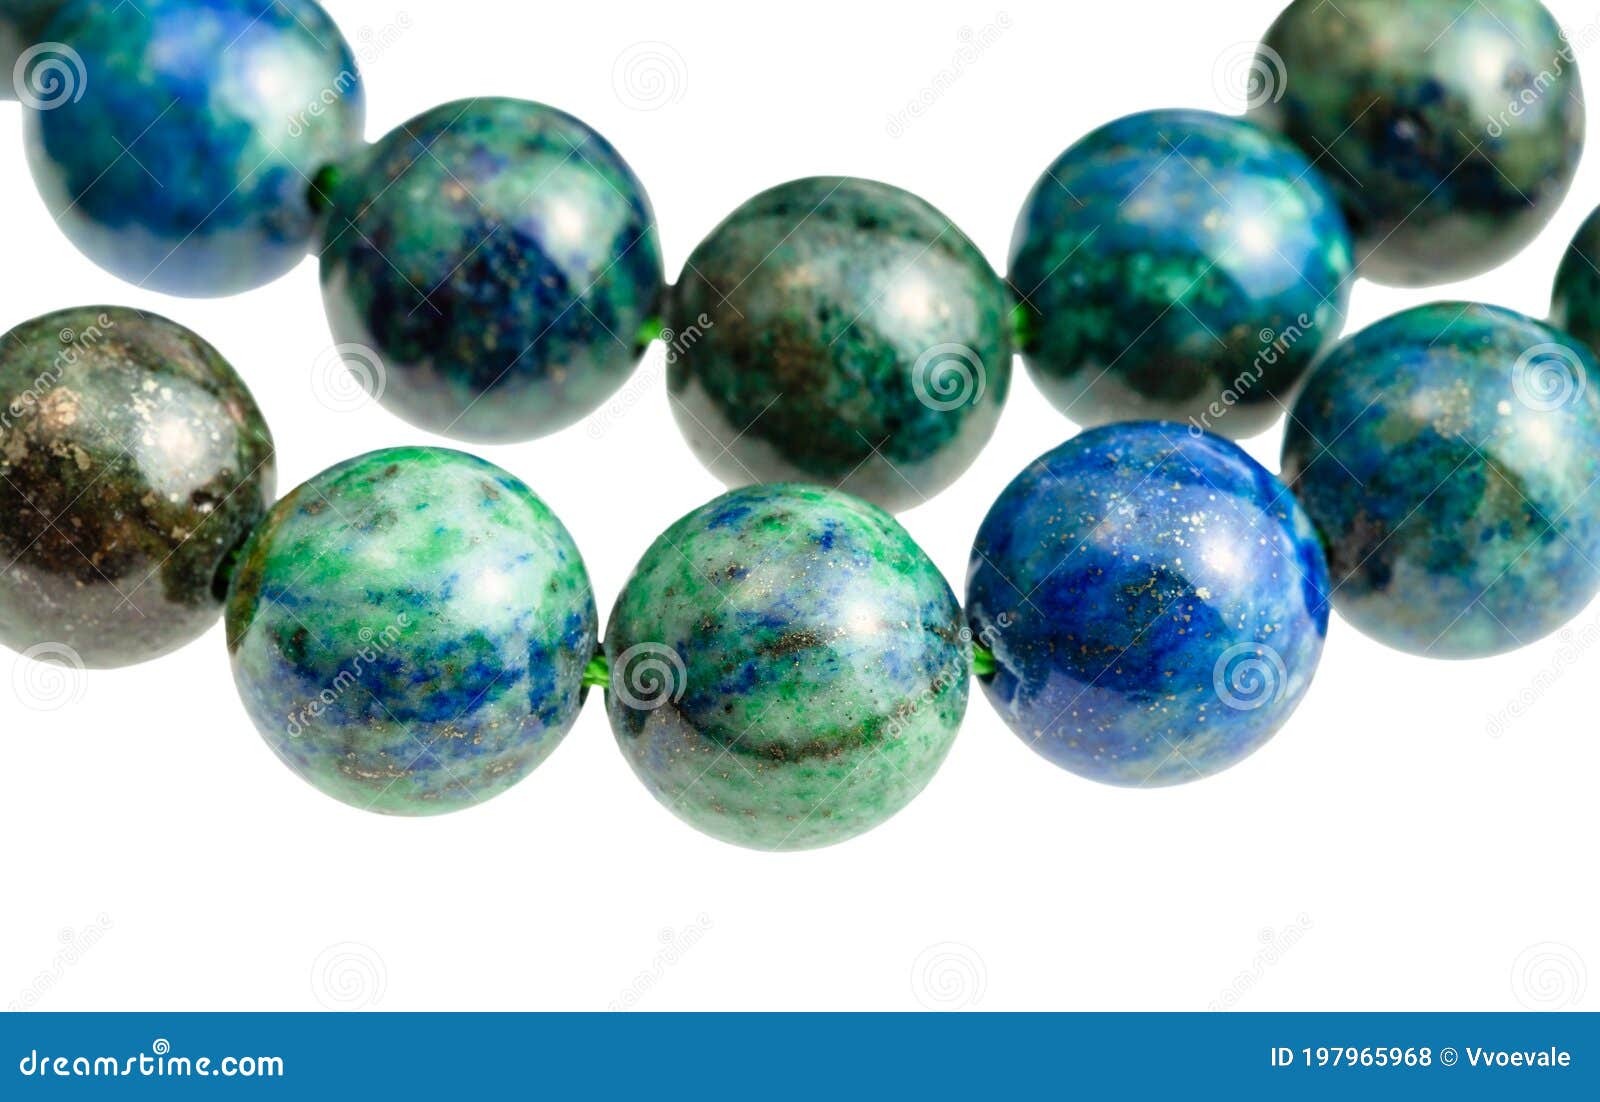 two strings from azurite with malachite balls